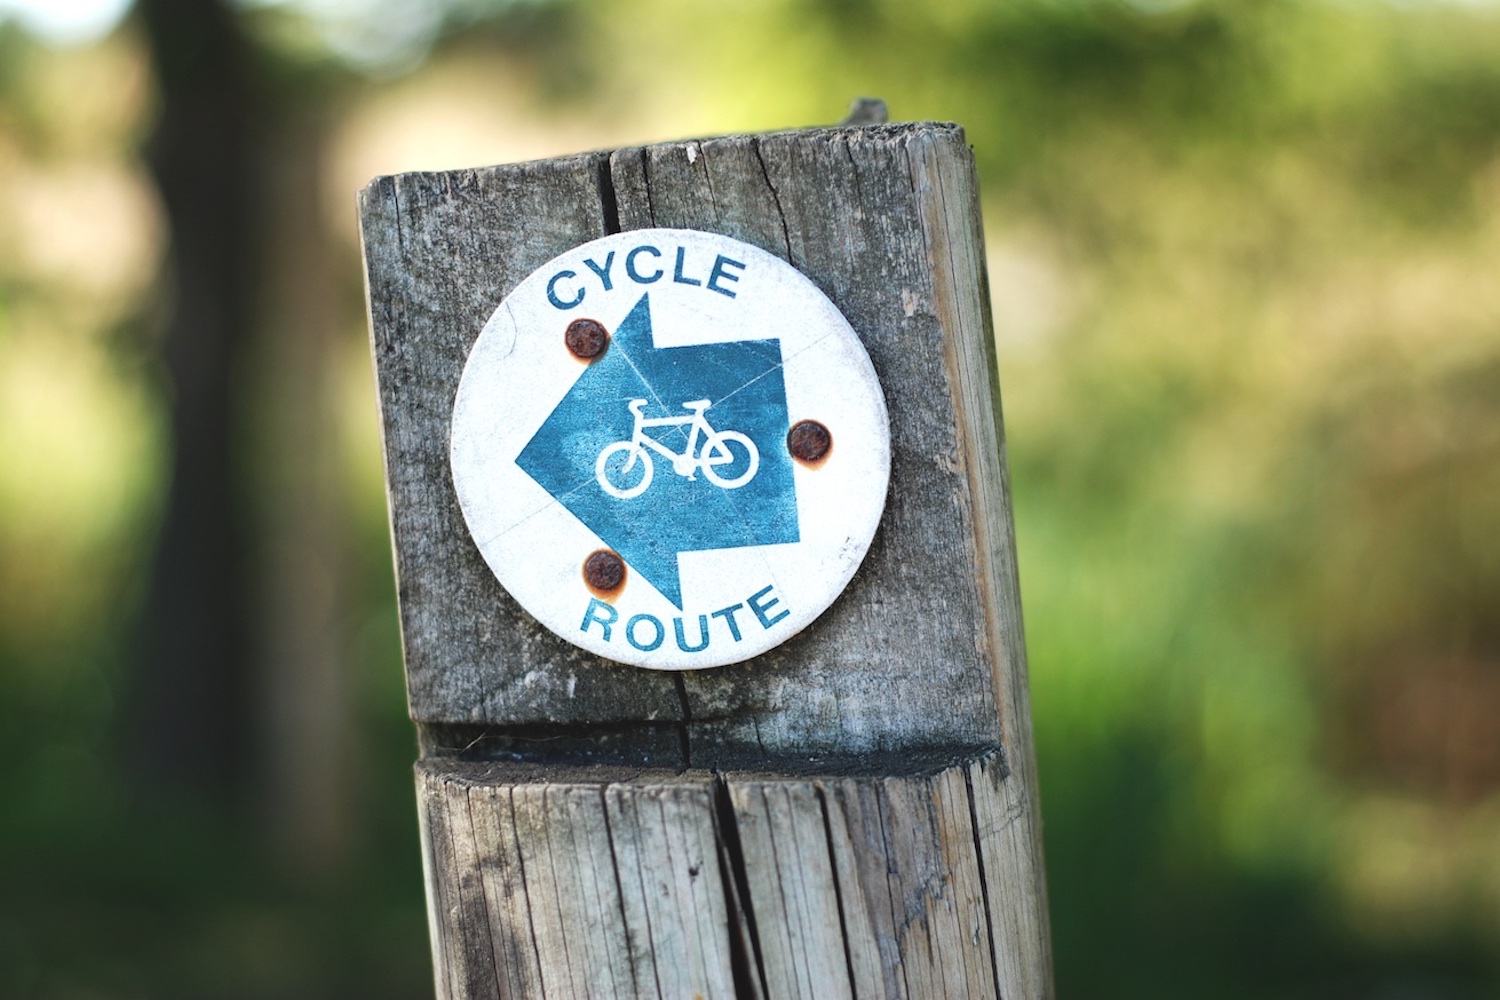 A cycle route sign